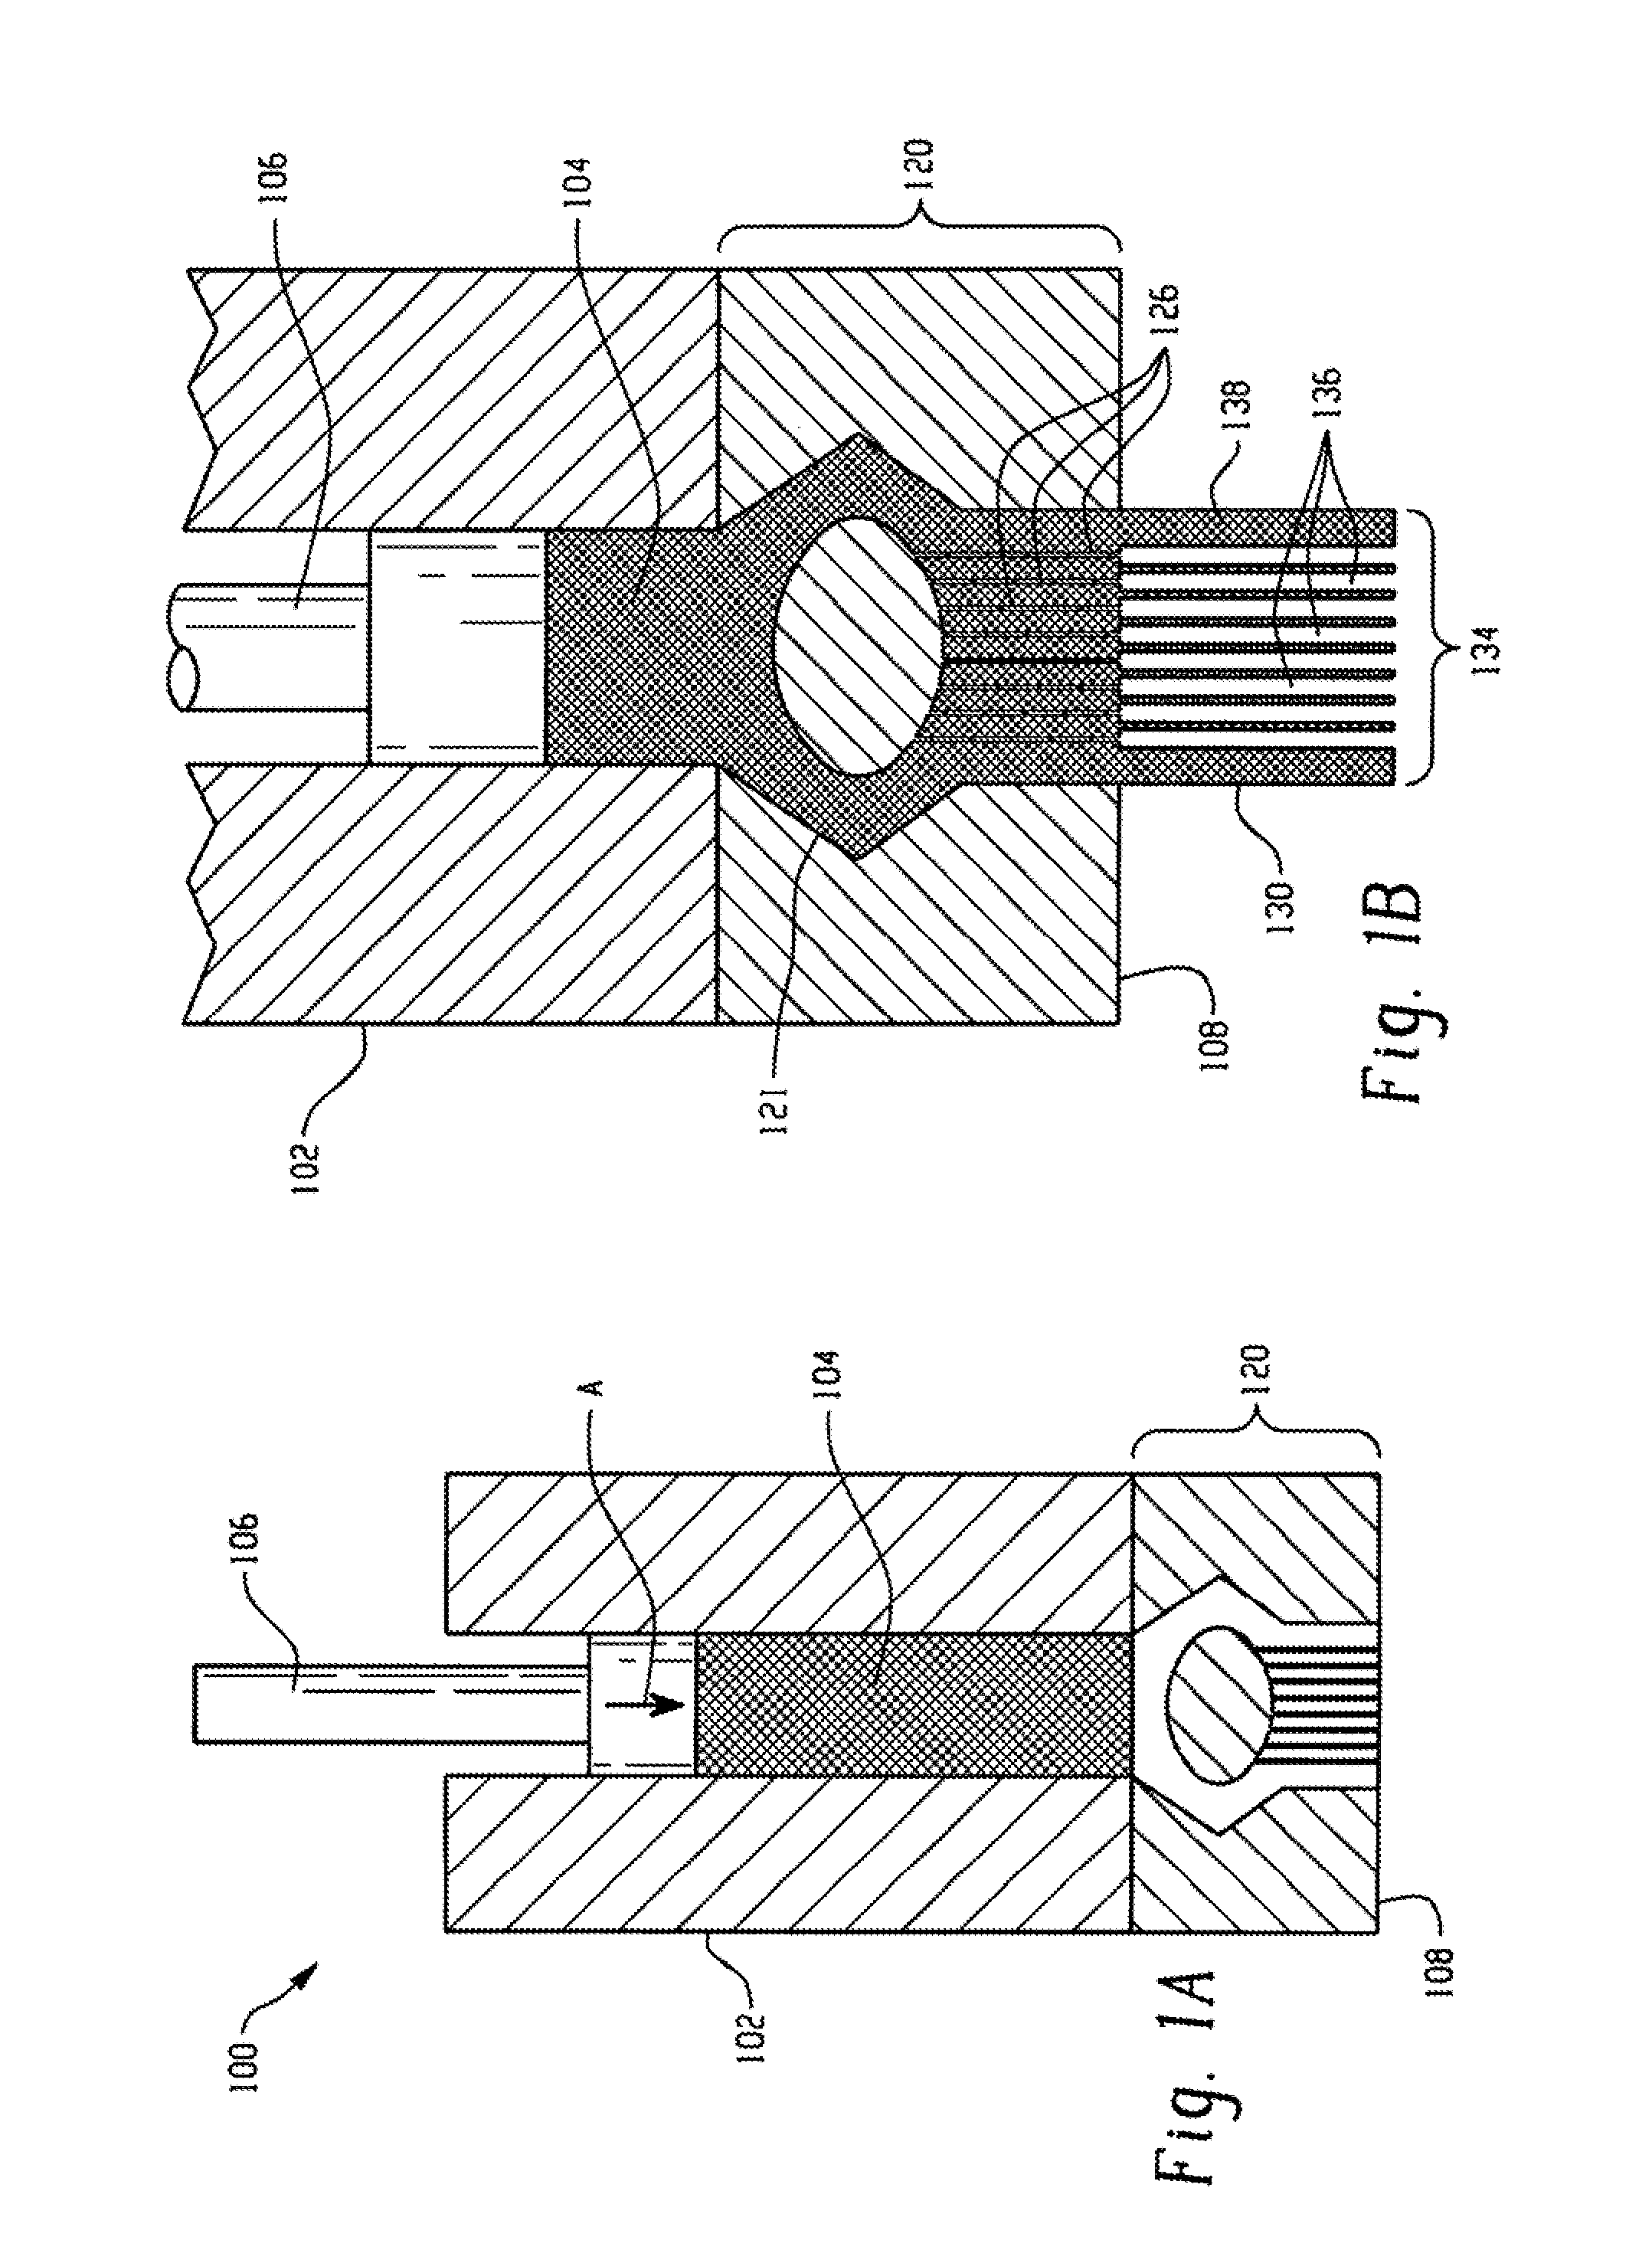 Direct extrusion method for the fabrication of photonic band gap (PBG) fibers and fiber preforms